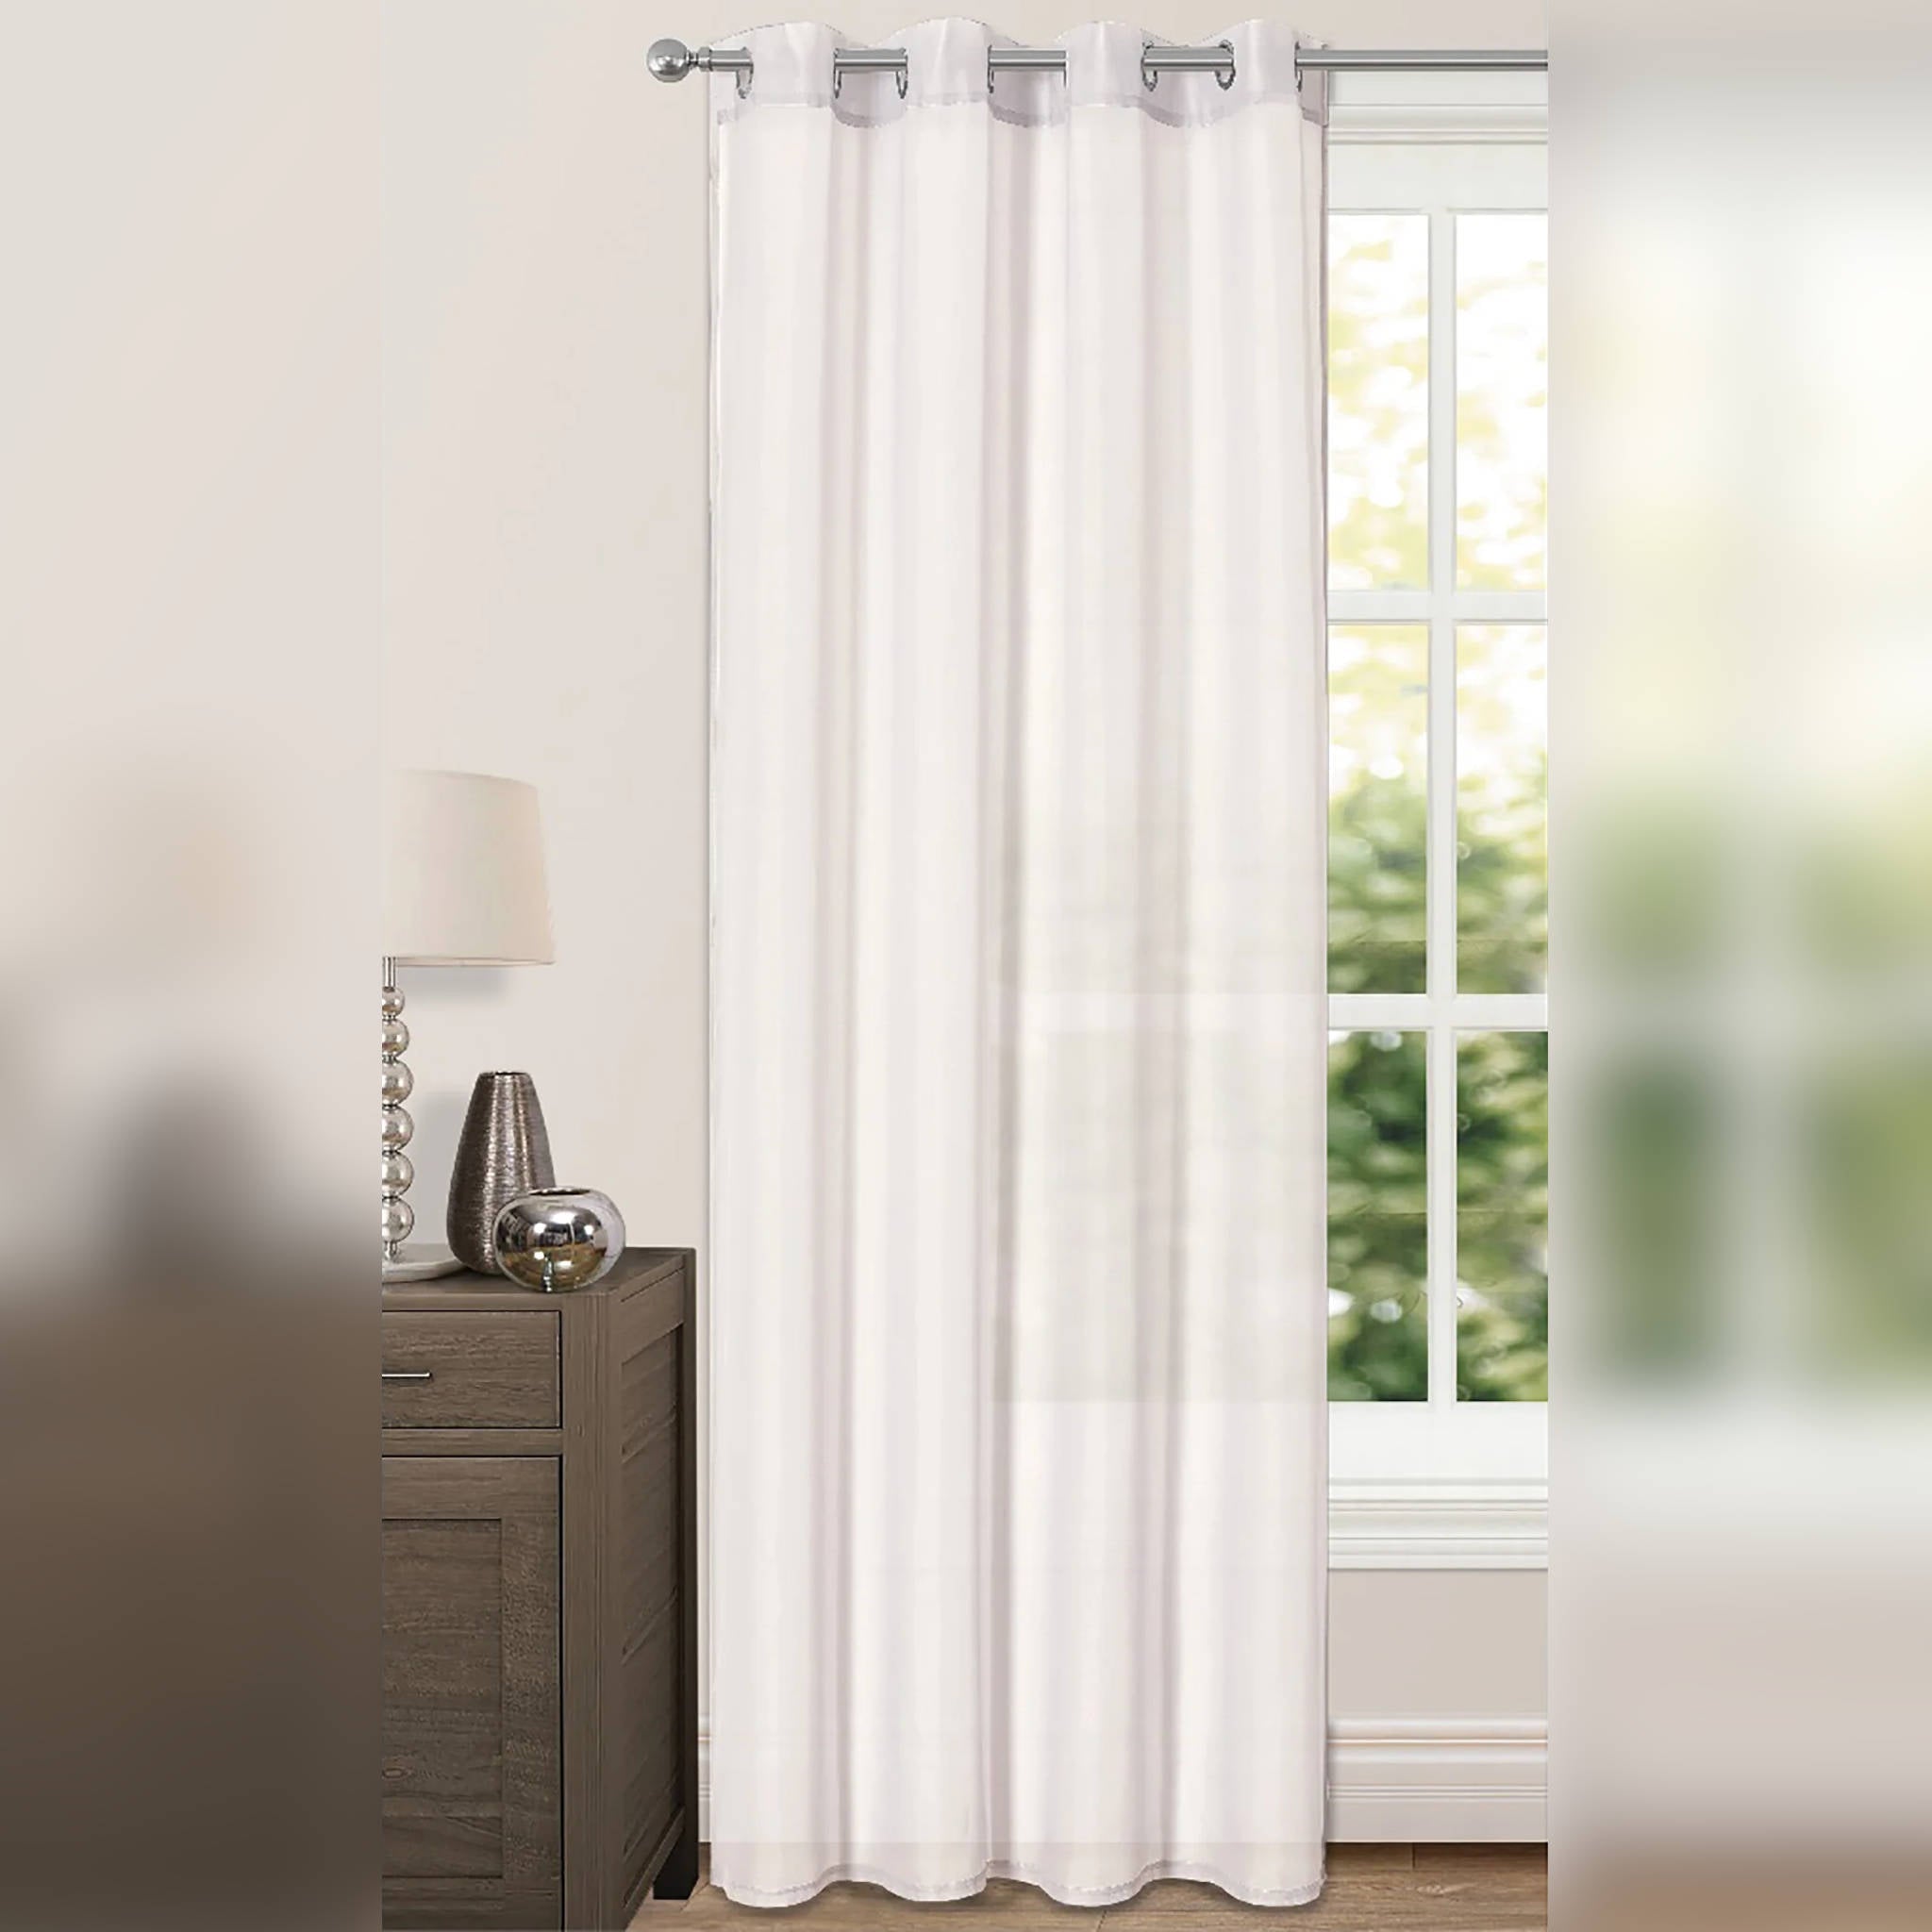 Intimates Riva Voile Panels Ring Top Eyelet Curtains | 59x48in